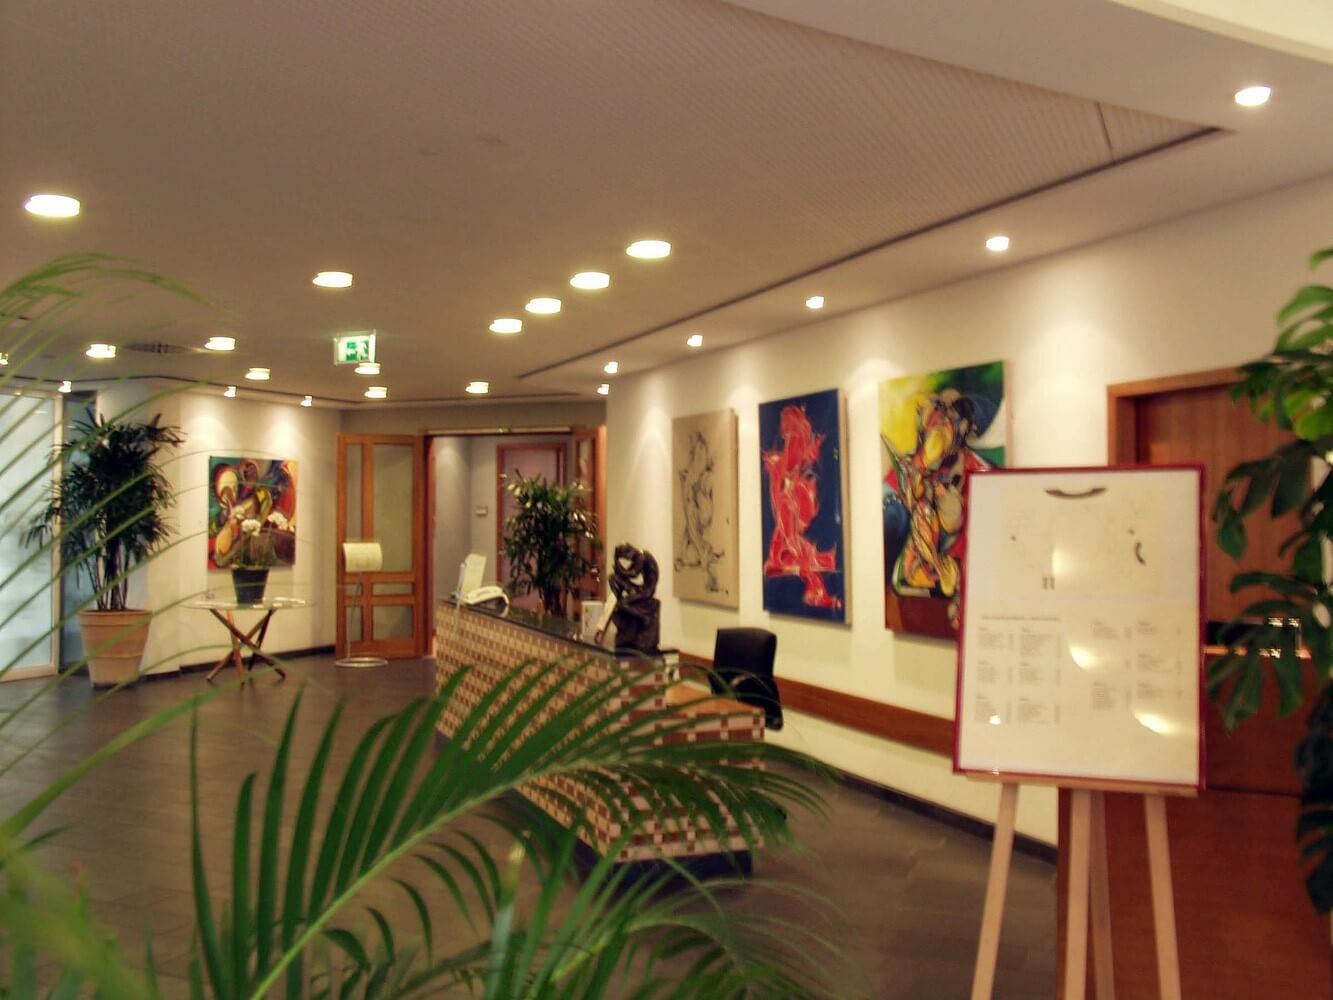 Photo of the artist and painter Michael J. Korber's Gala Event at Club Monet in Luxembourg City, Luxembourg.